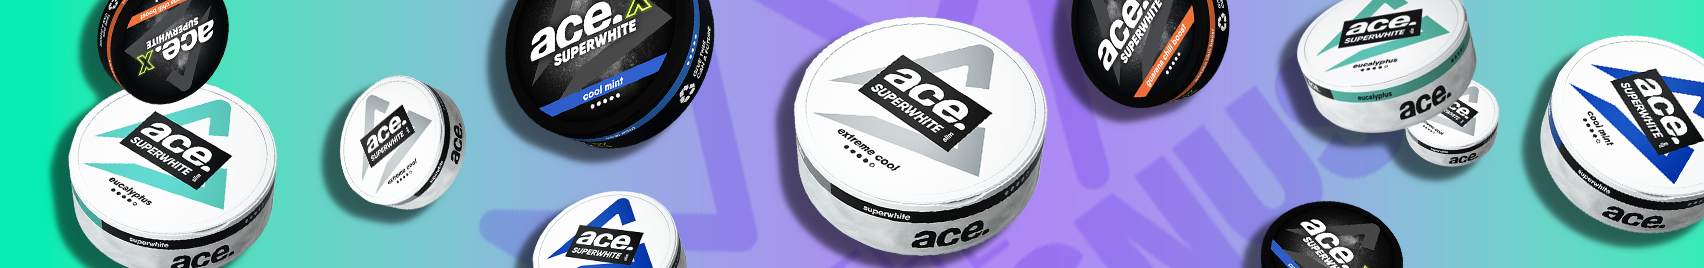 Buy Ace snus and nicotine pouches online